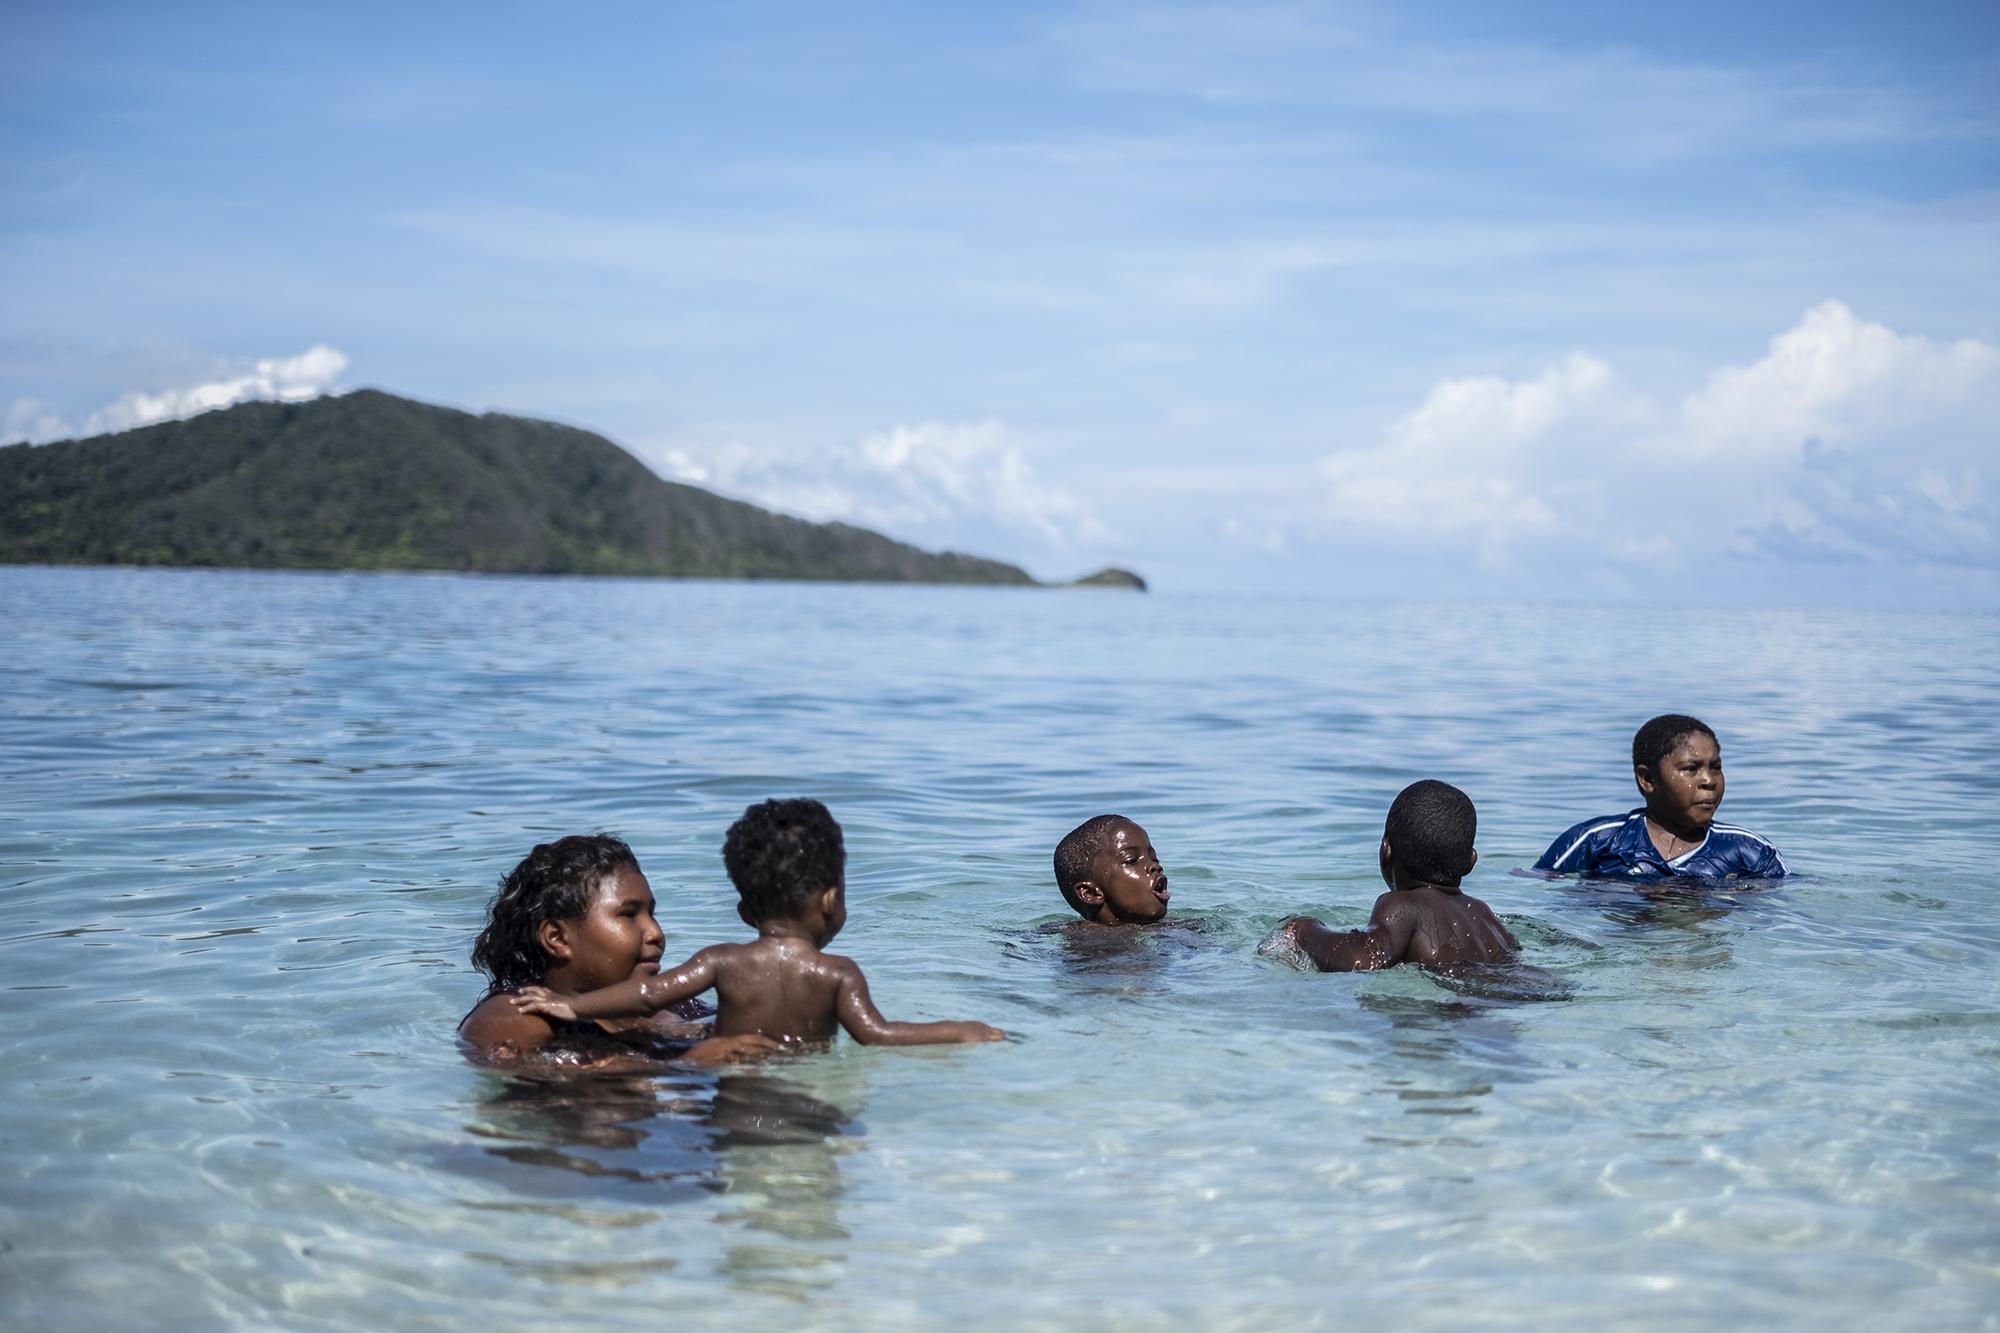 Swimming, fishing, and diving are everyday activities for children in Chachahuate. Photo: Carlos Barrera/El Faro